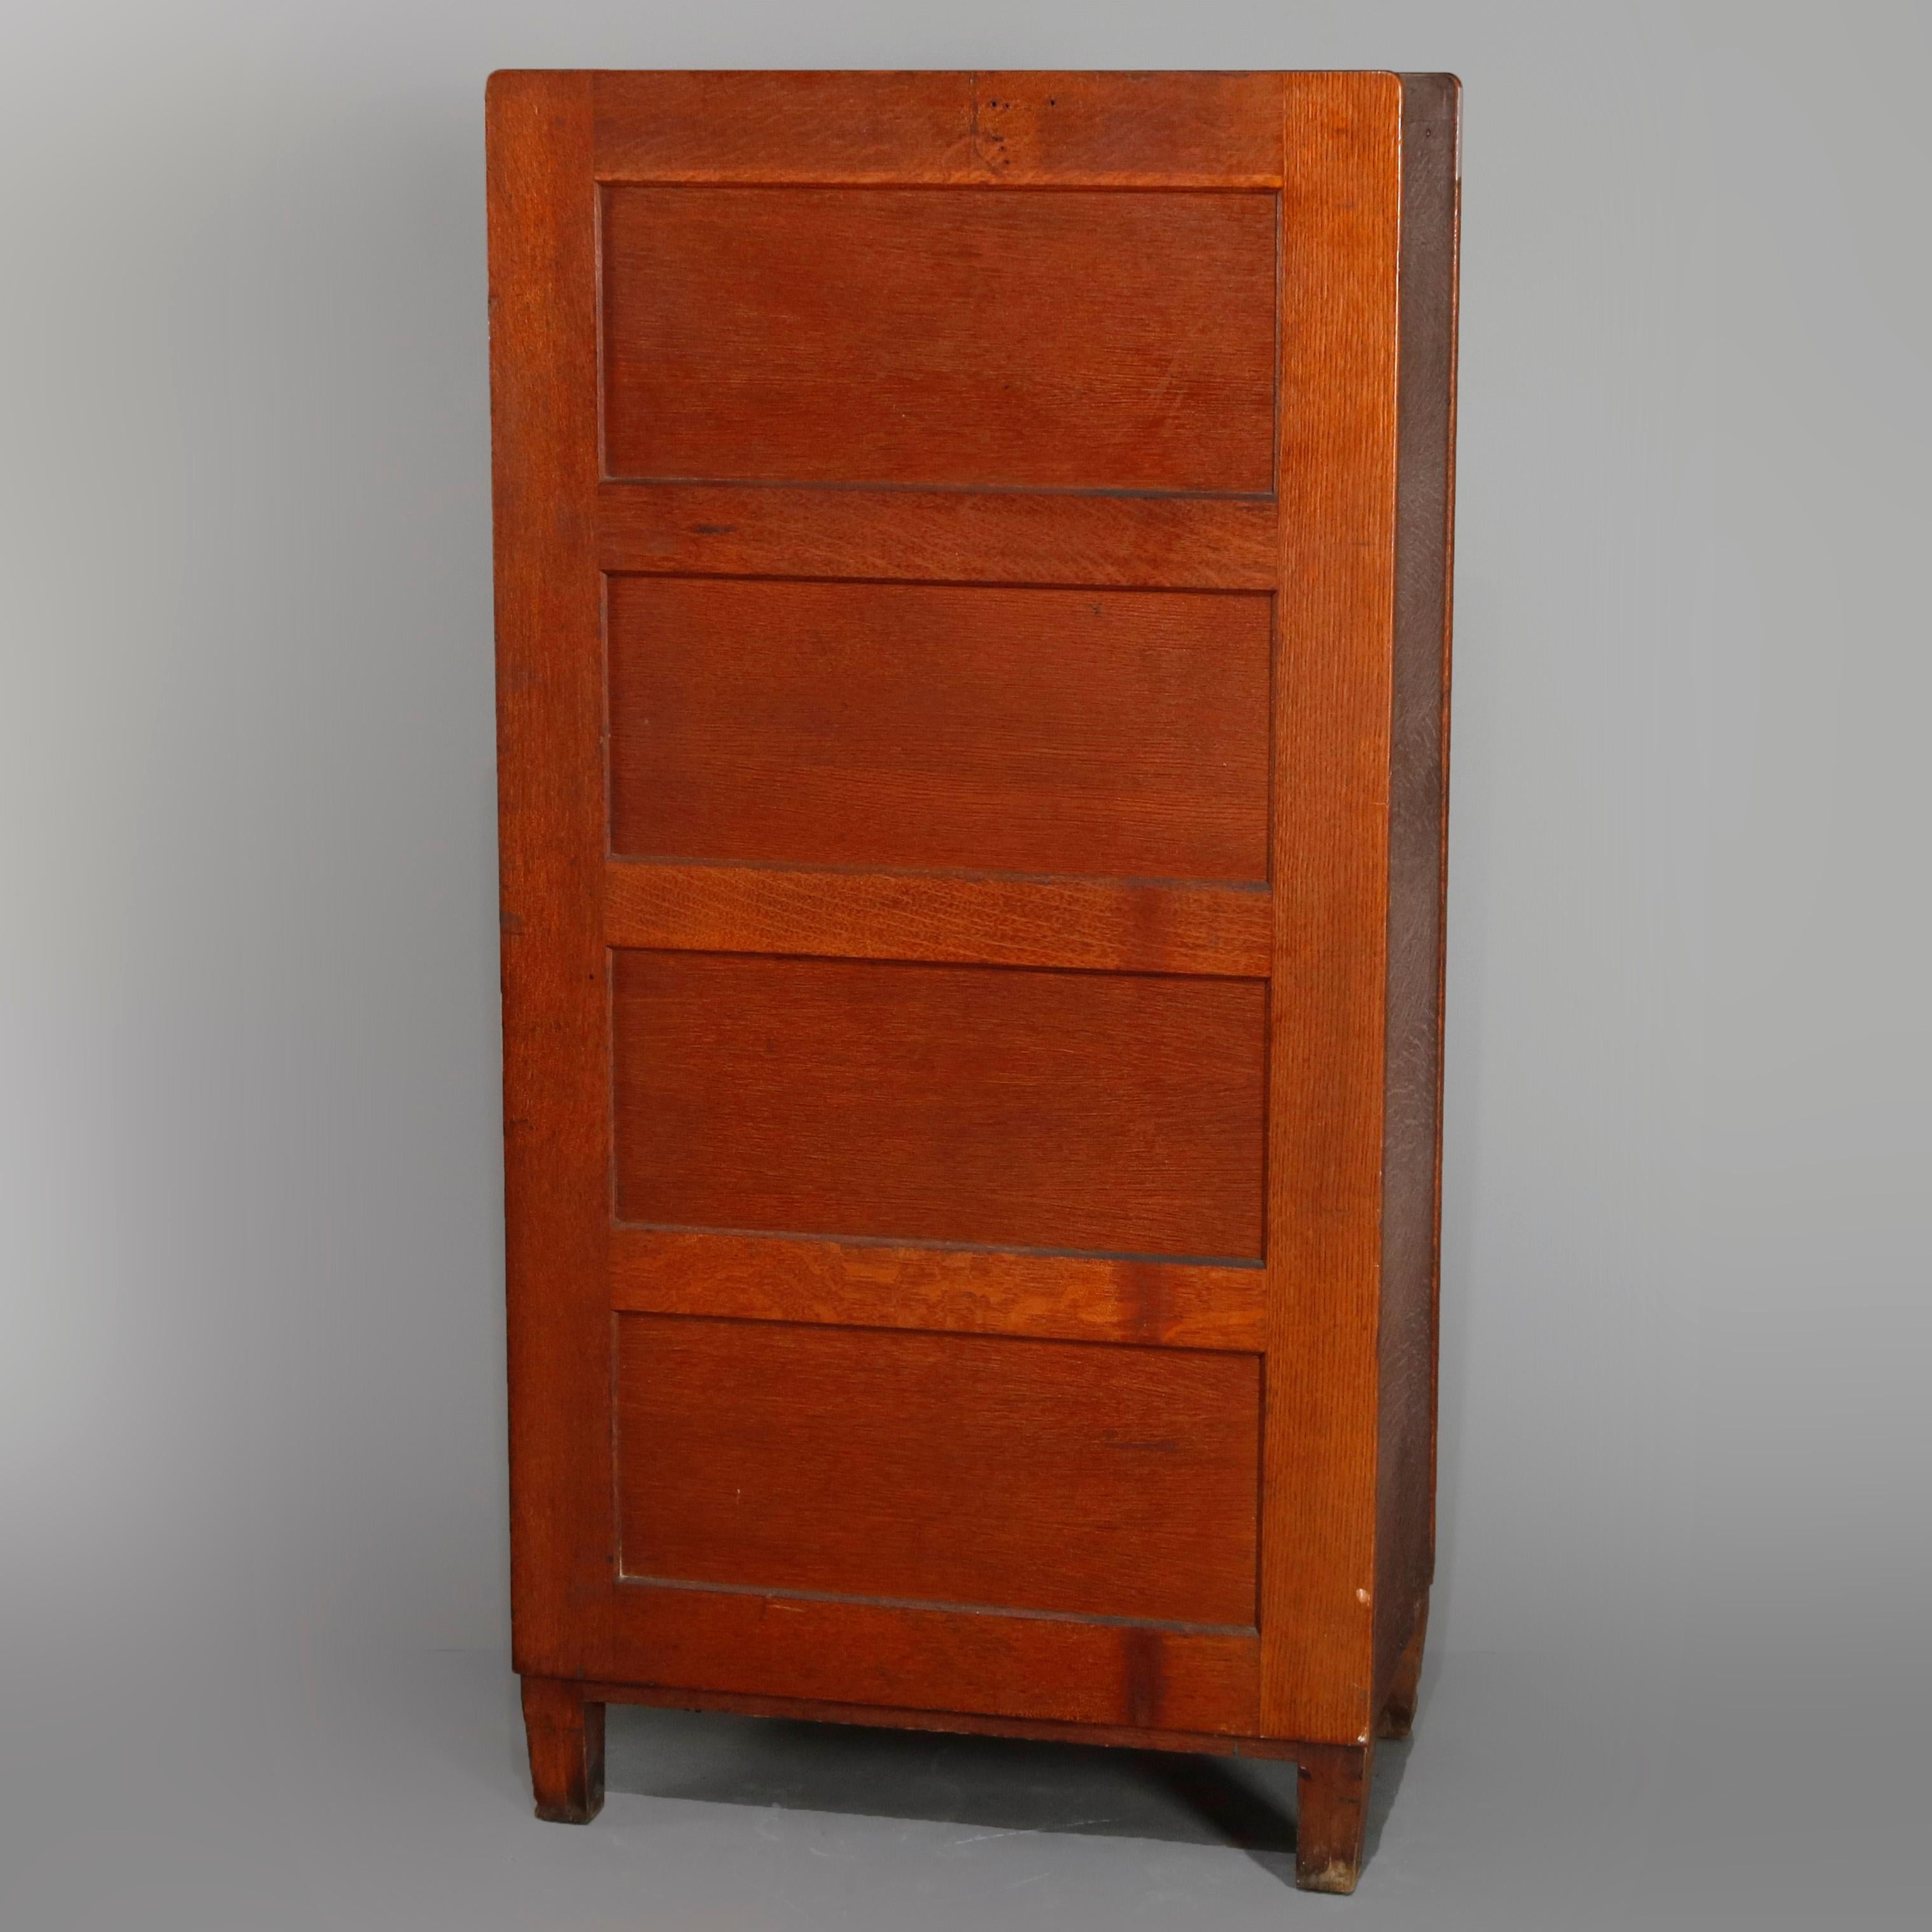 An antique Arts & Crafts mission oak filing cabinet by Yawman & Erbe offers paneled construction with 10 drawers having bronze pulls, raised on square and tapered legs, maker mark as photographed, circa 1910

Measures: 55.5